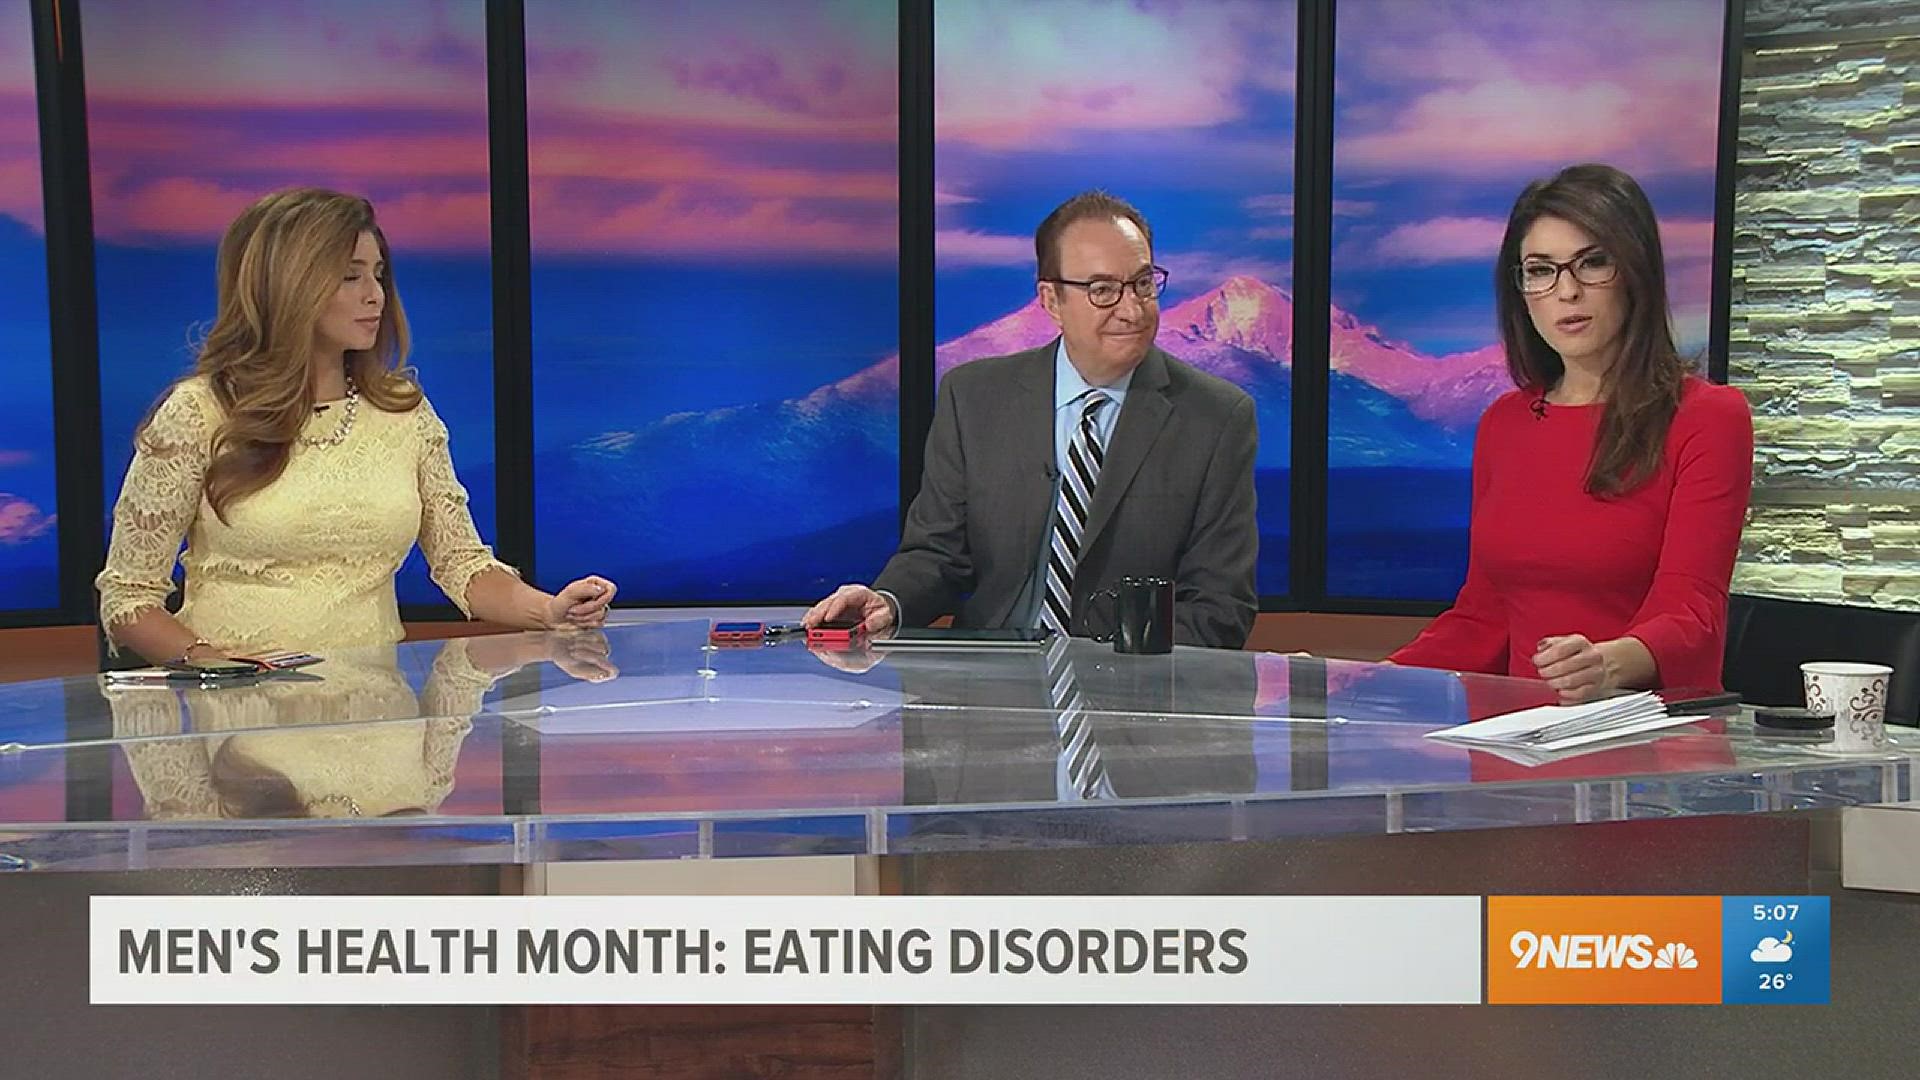 9NEWS reporter Eddie Randle reports on the growing trend of male eating disorders.